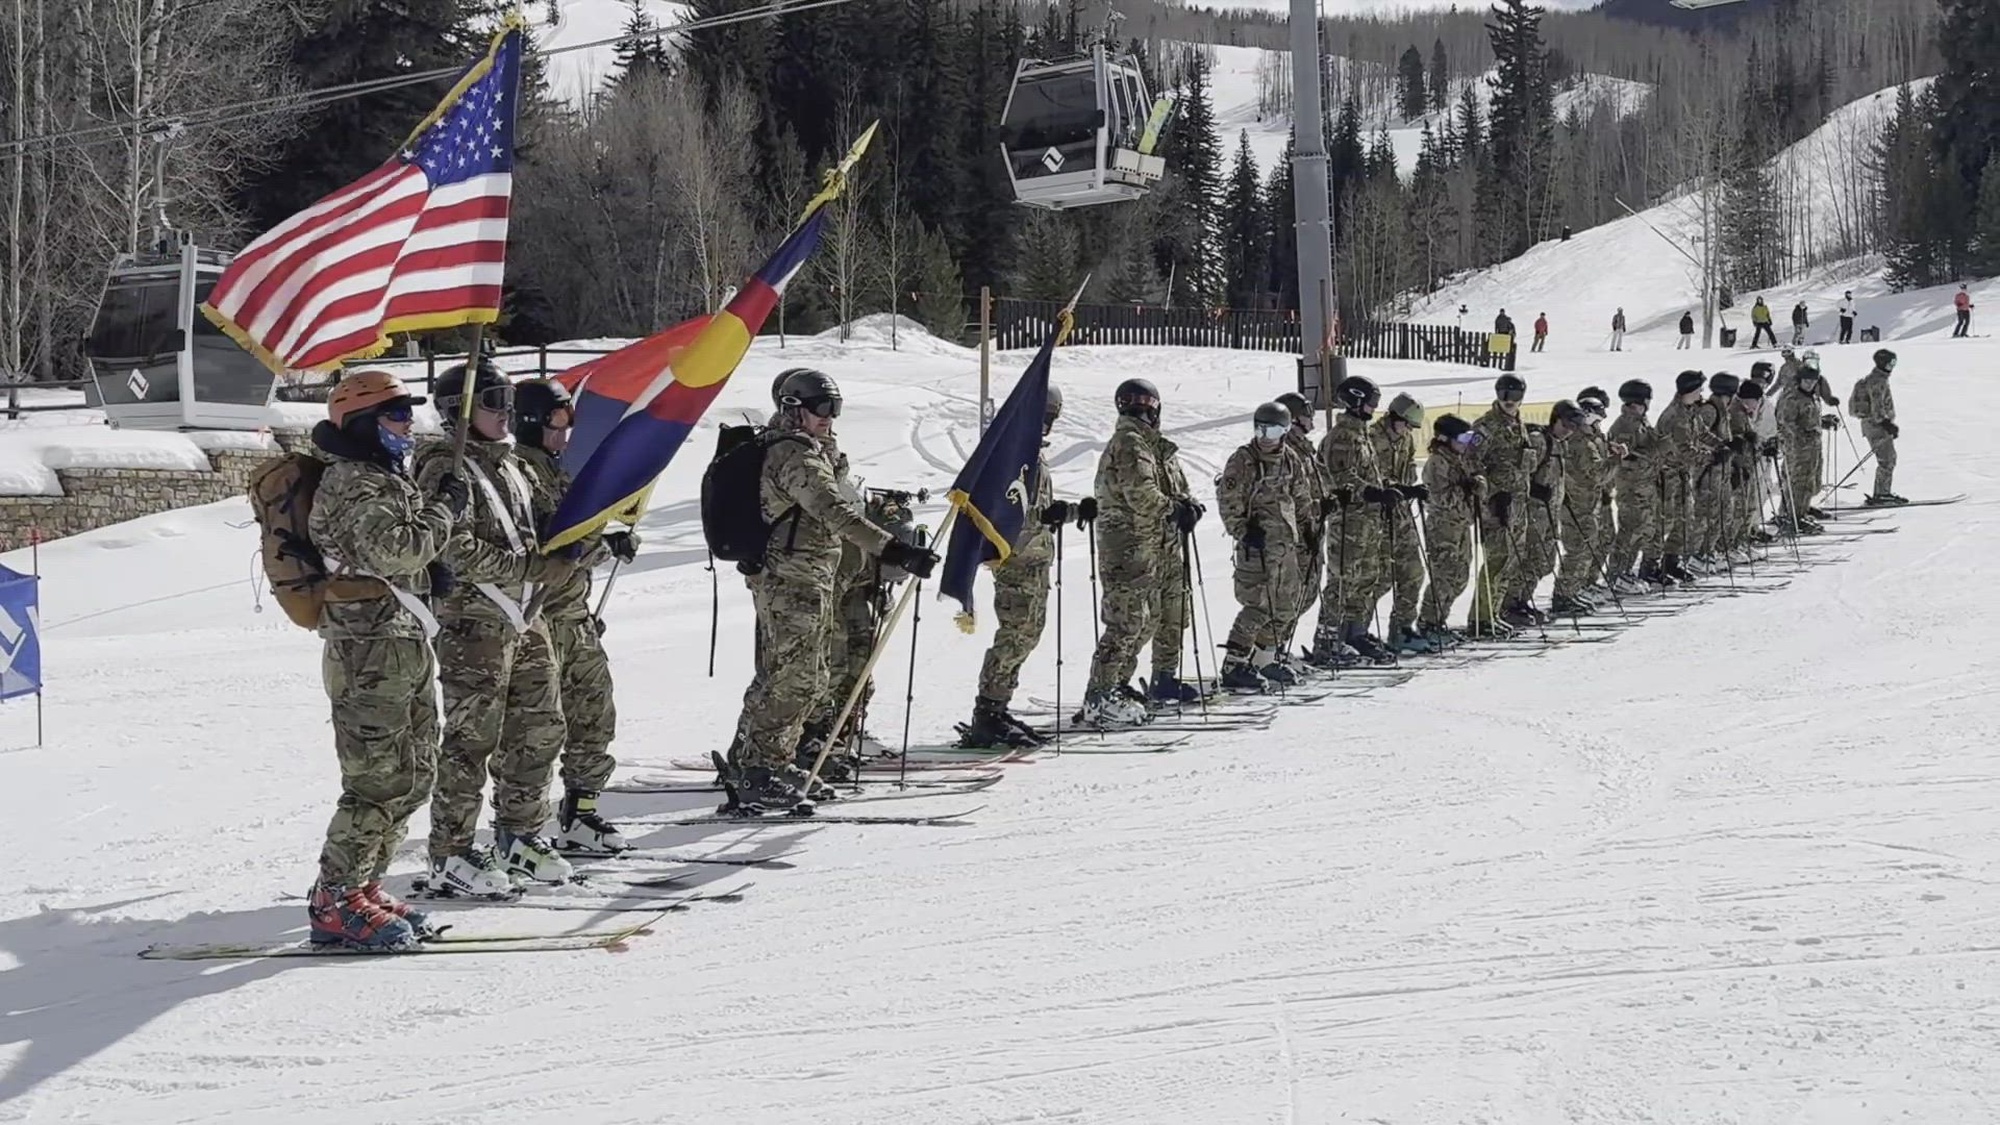 B-Rol of Soldiers with the 10th Mountain Division, descendants, veterans, and members of the community participated in Vail Ski Resort’s longest single-run ski trail. (U.S. Army video by Capt. Eric-James Estrada)